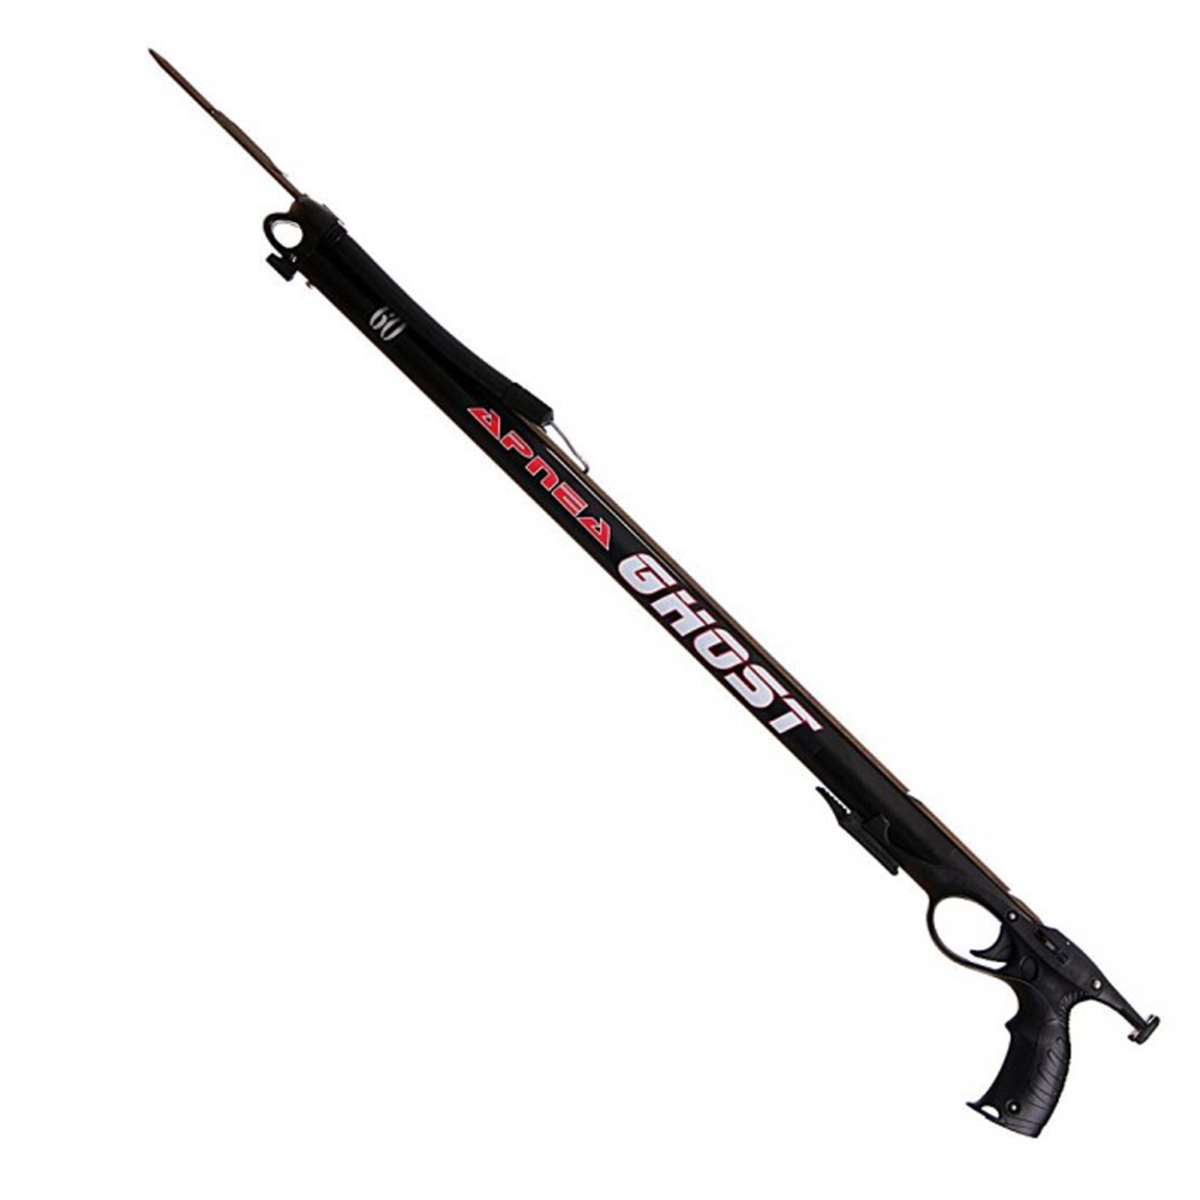 https://www.smartmarine.co.nz/cdn/images/products/xlarge/8073645_ghost_spear_1.png